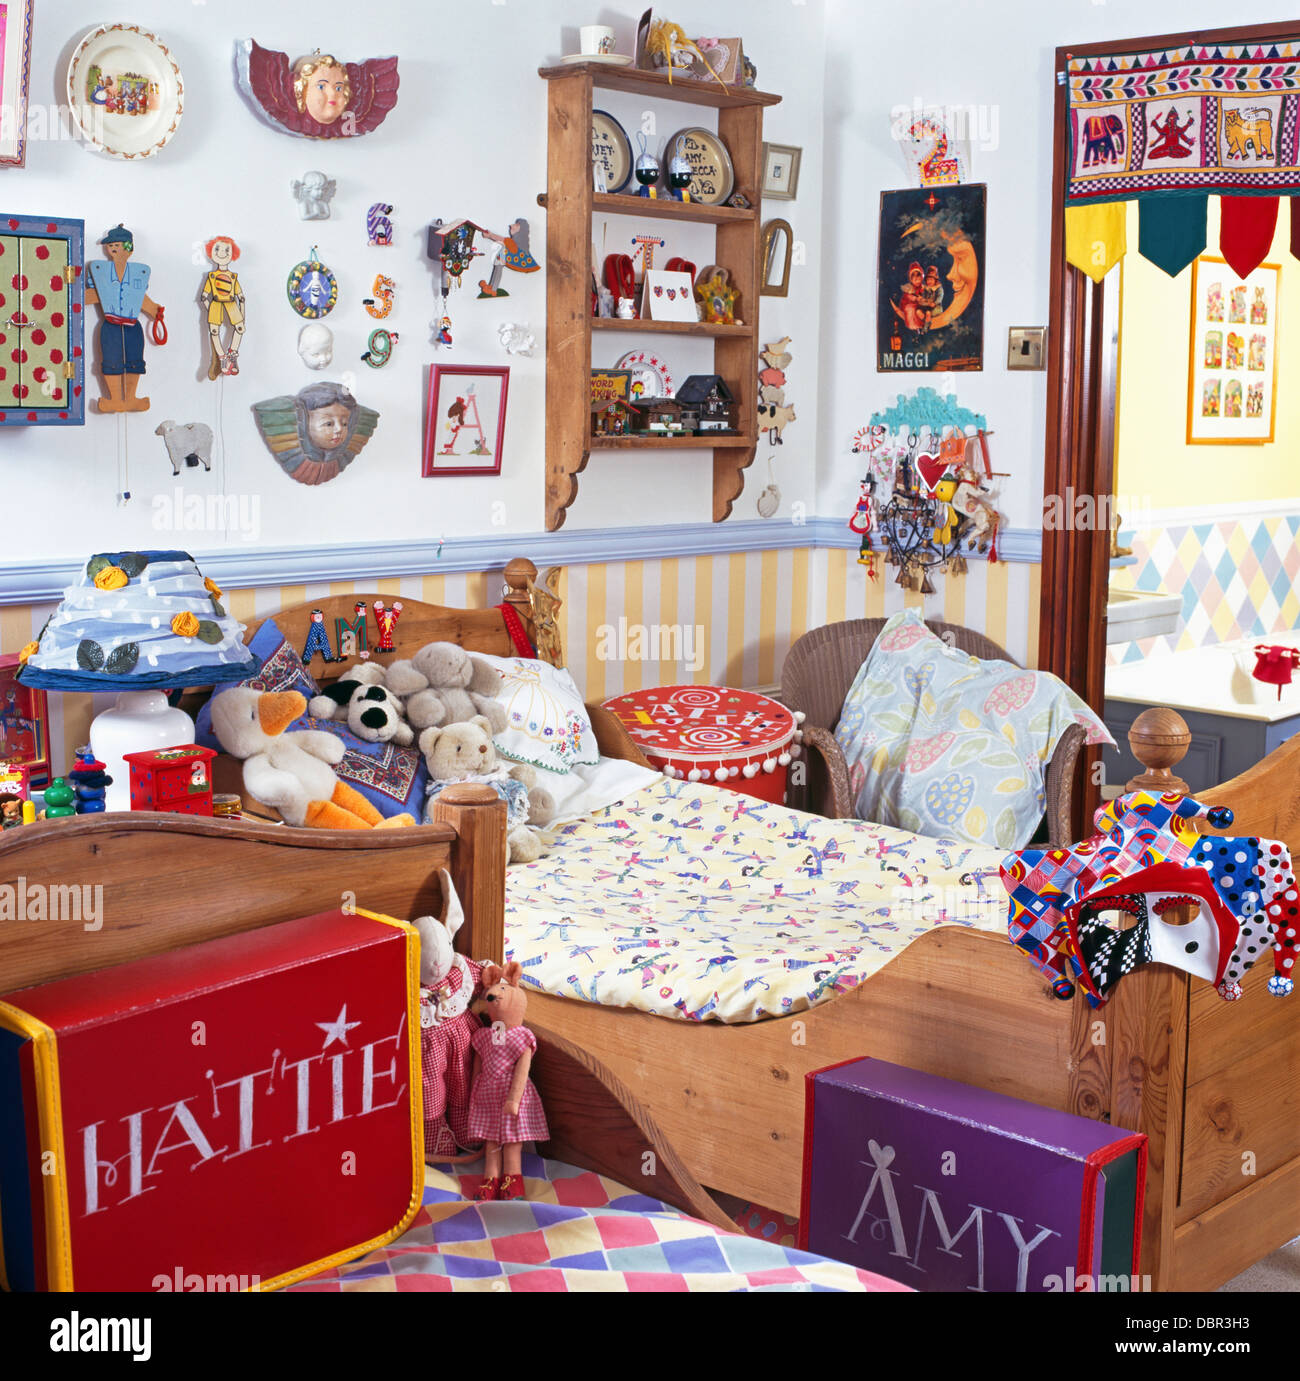 Colorful boxes with painted names in children's bedroom with old pine beds and wall shelves Stock Photo